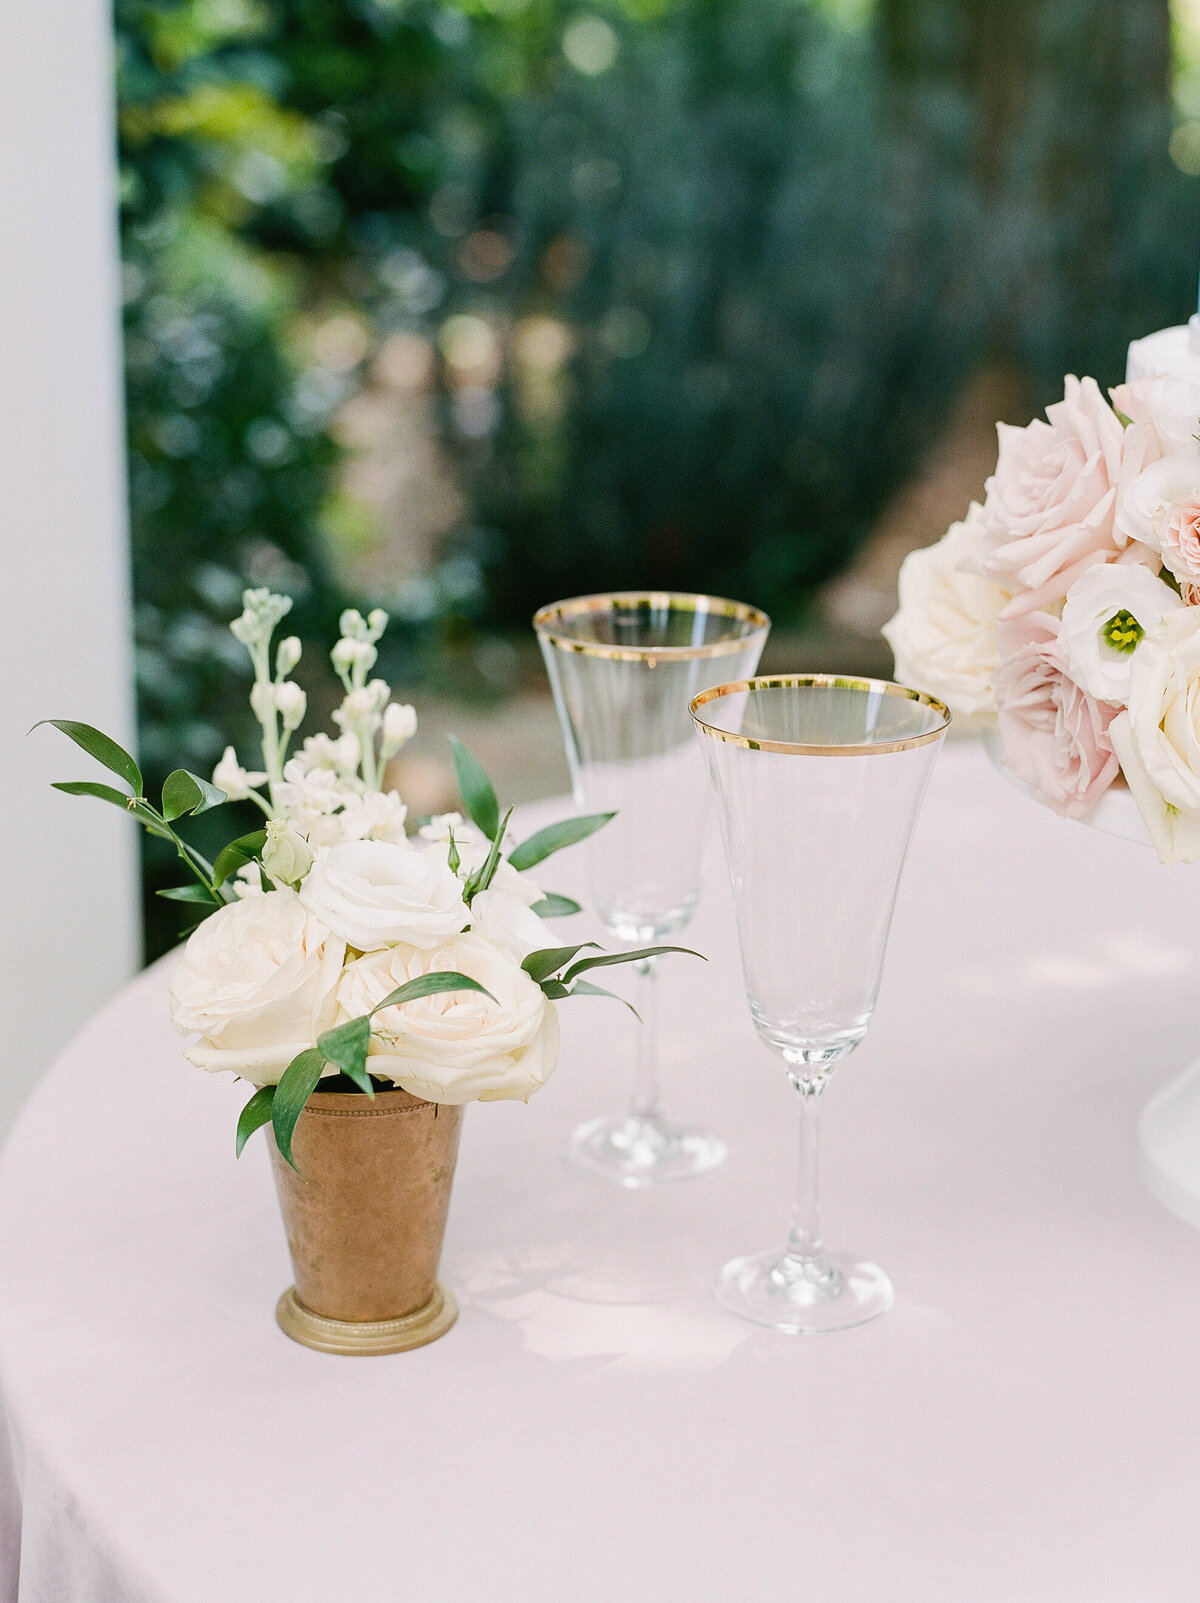 Floral details from a french inspired summer editorial shoot at the Duke Mansion in Charlotte, NC